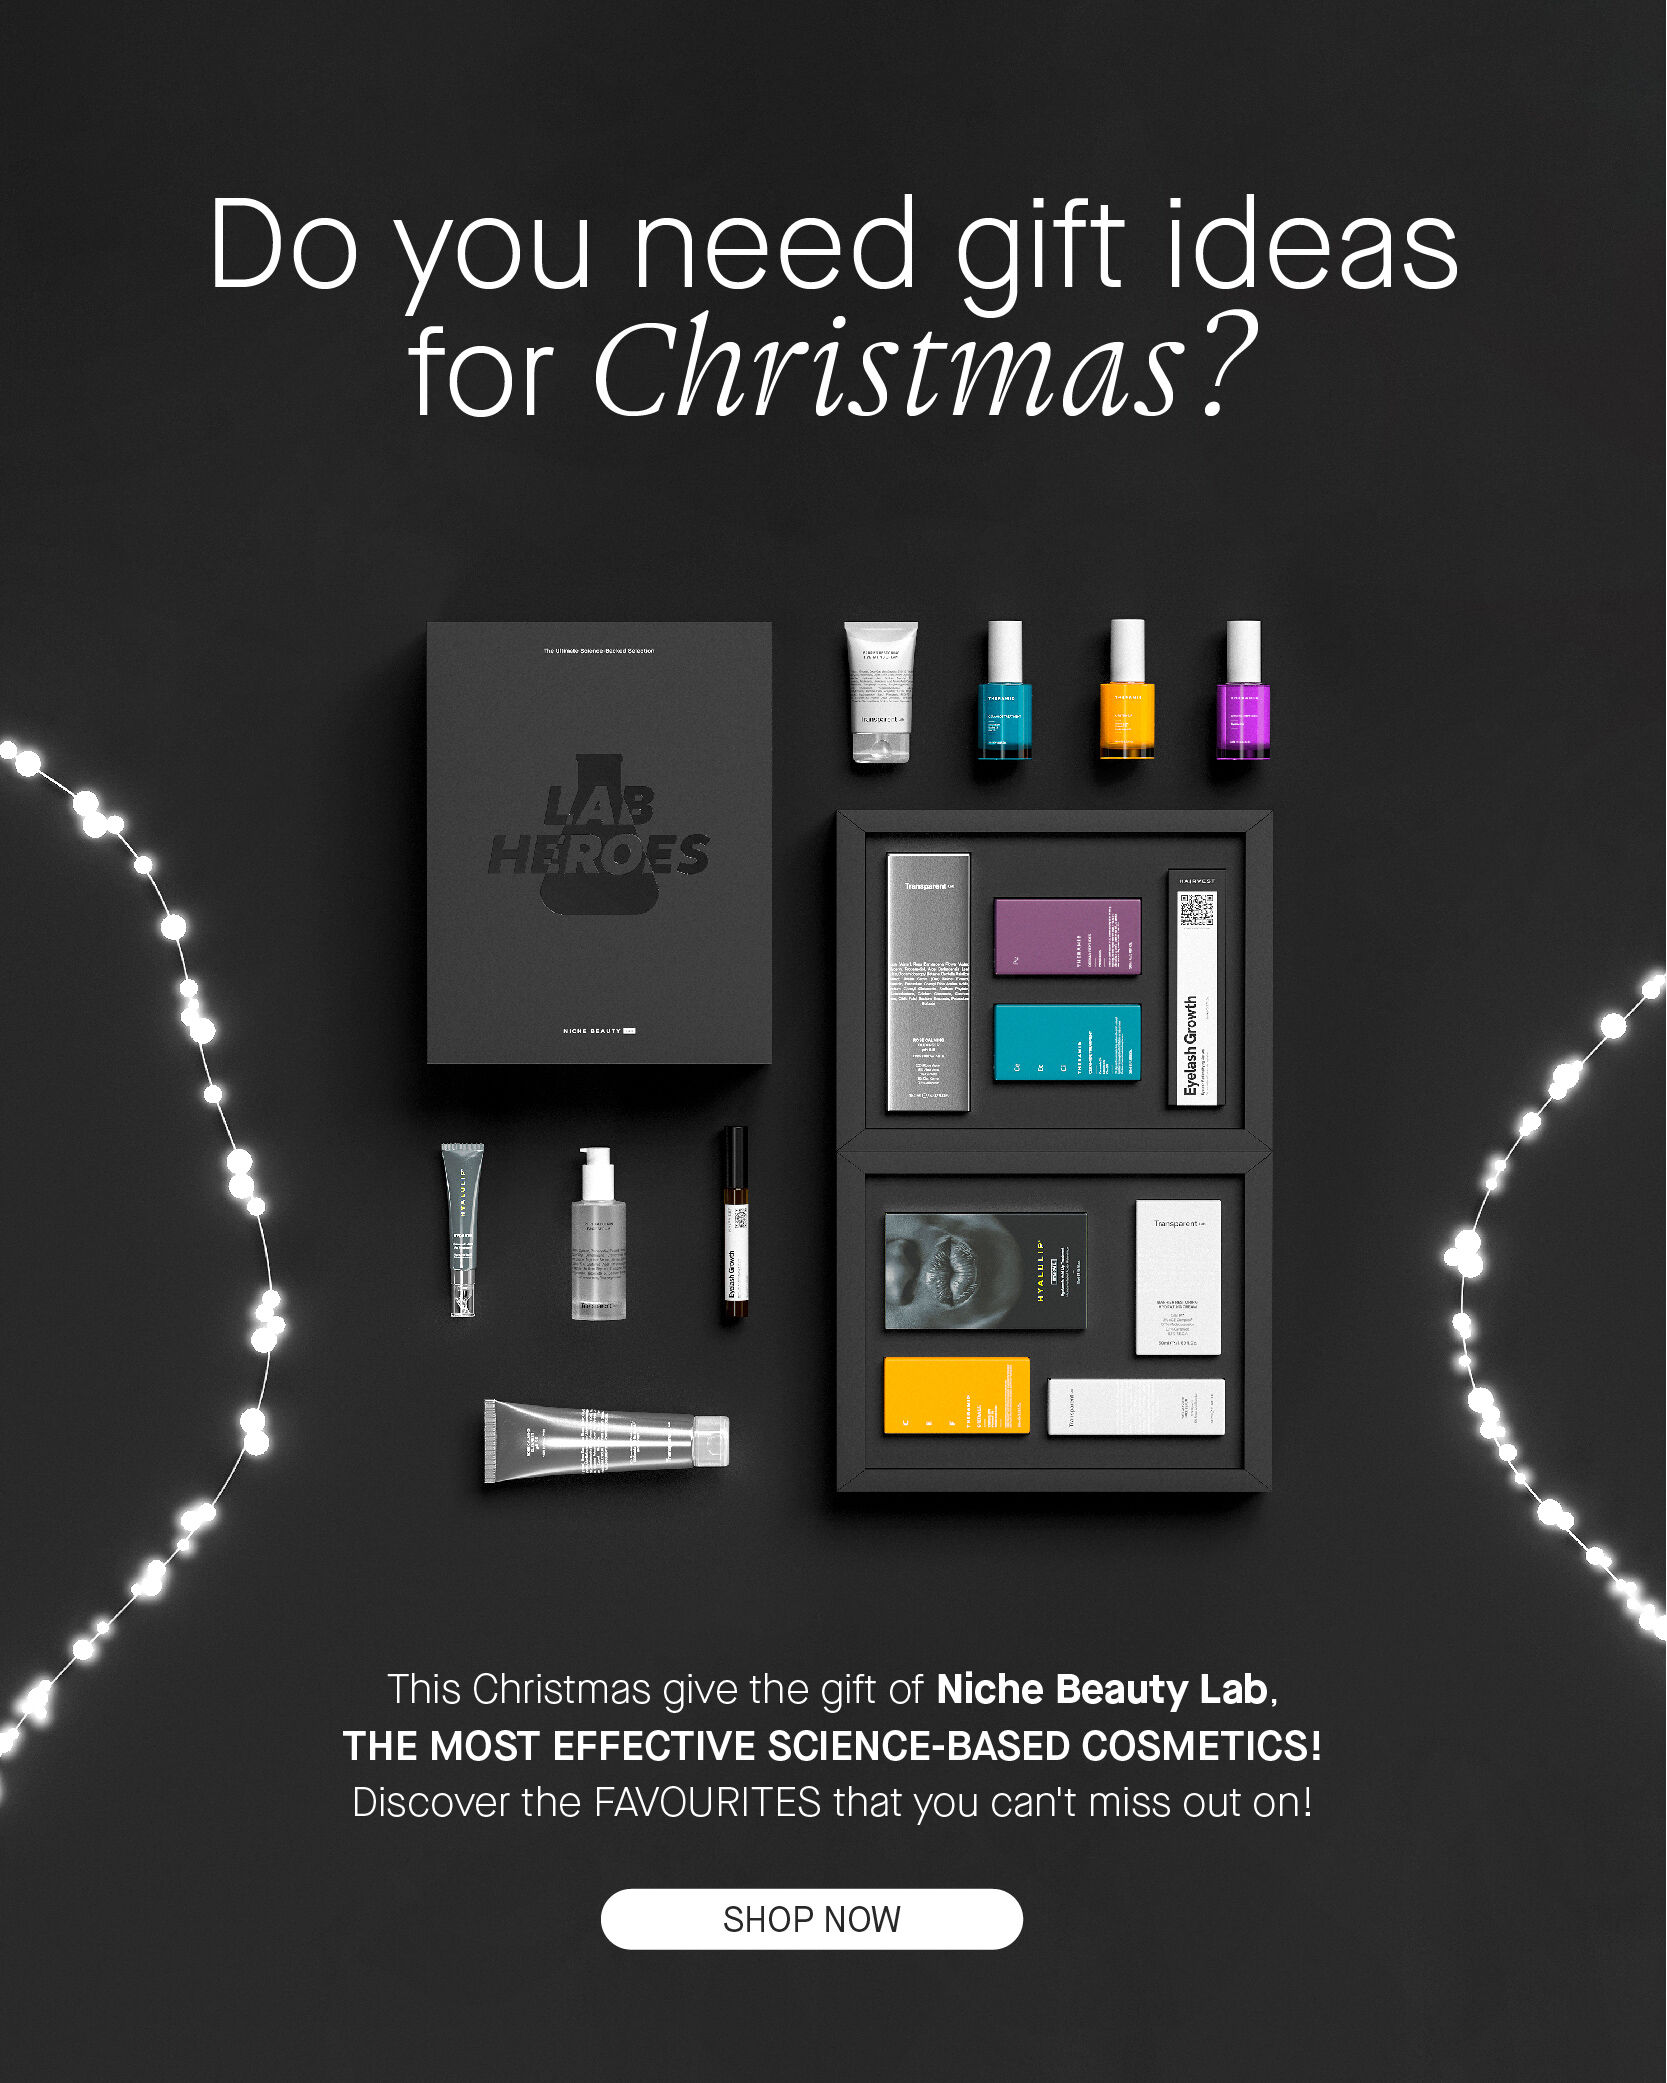 Do you need gift ideas LI AT Y This Christmas give the gift of Niche Beauty Lab, THE MOST EFFECTIVE SCIENCE-BASED COSMETICS! Discover the FAVOURITES that you can't miss out on! SHOP NOW 